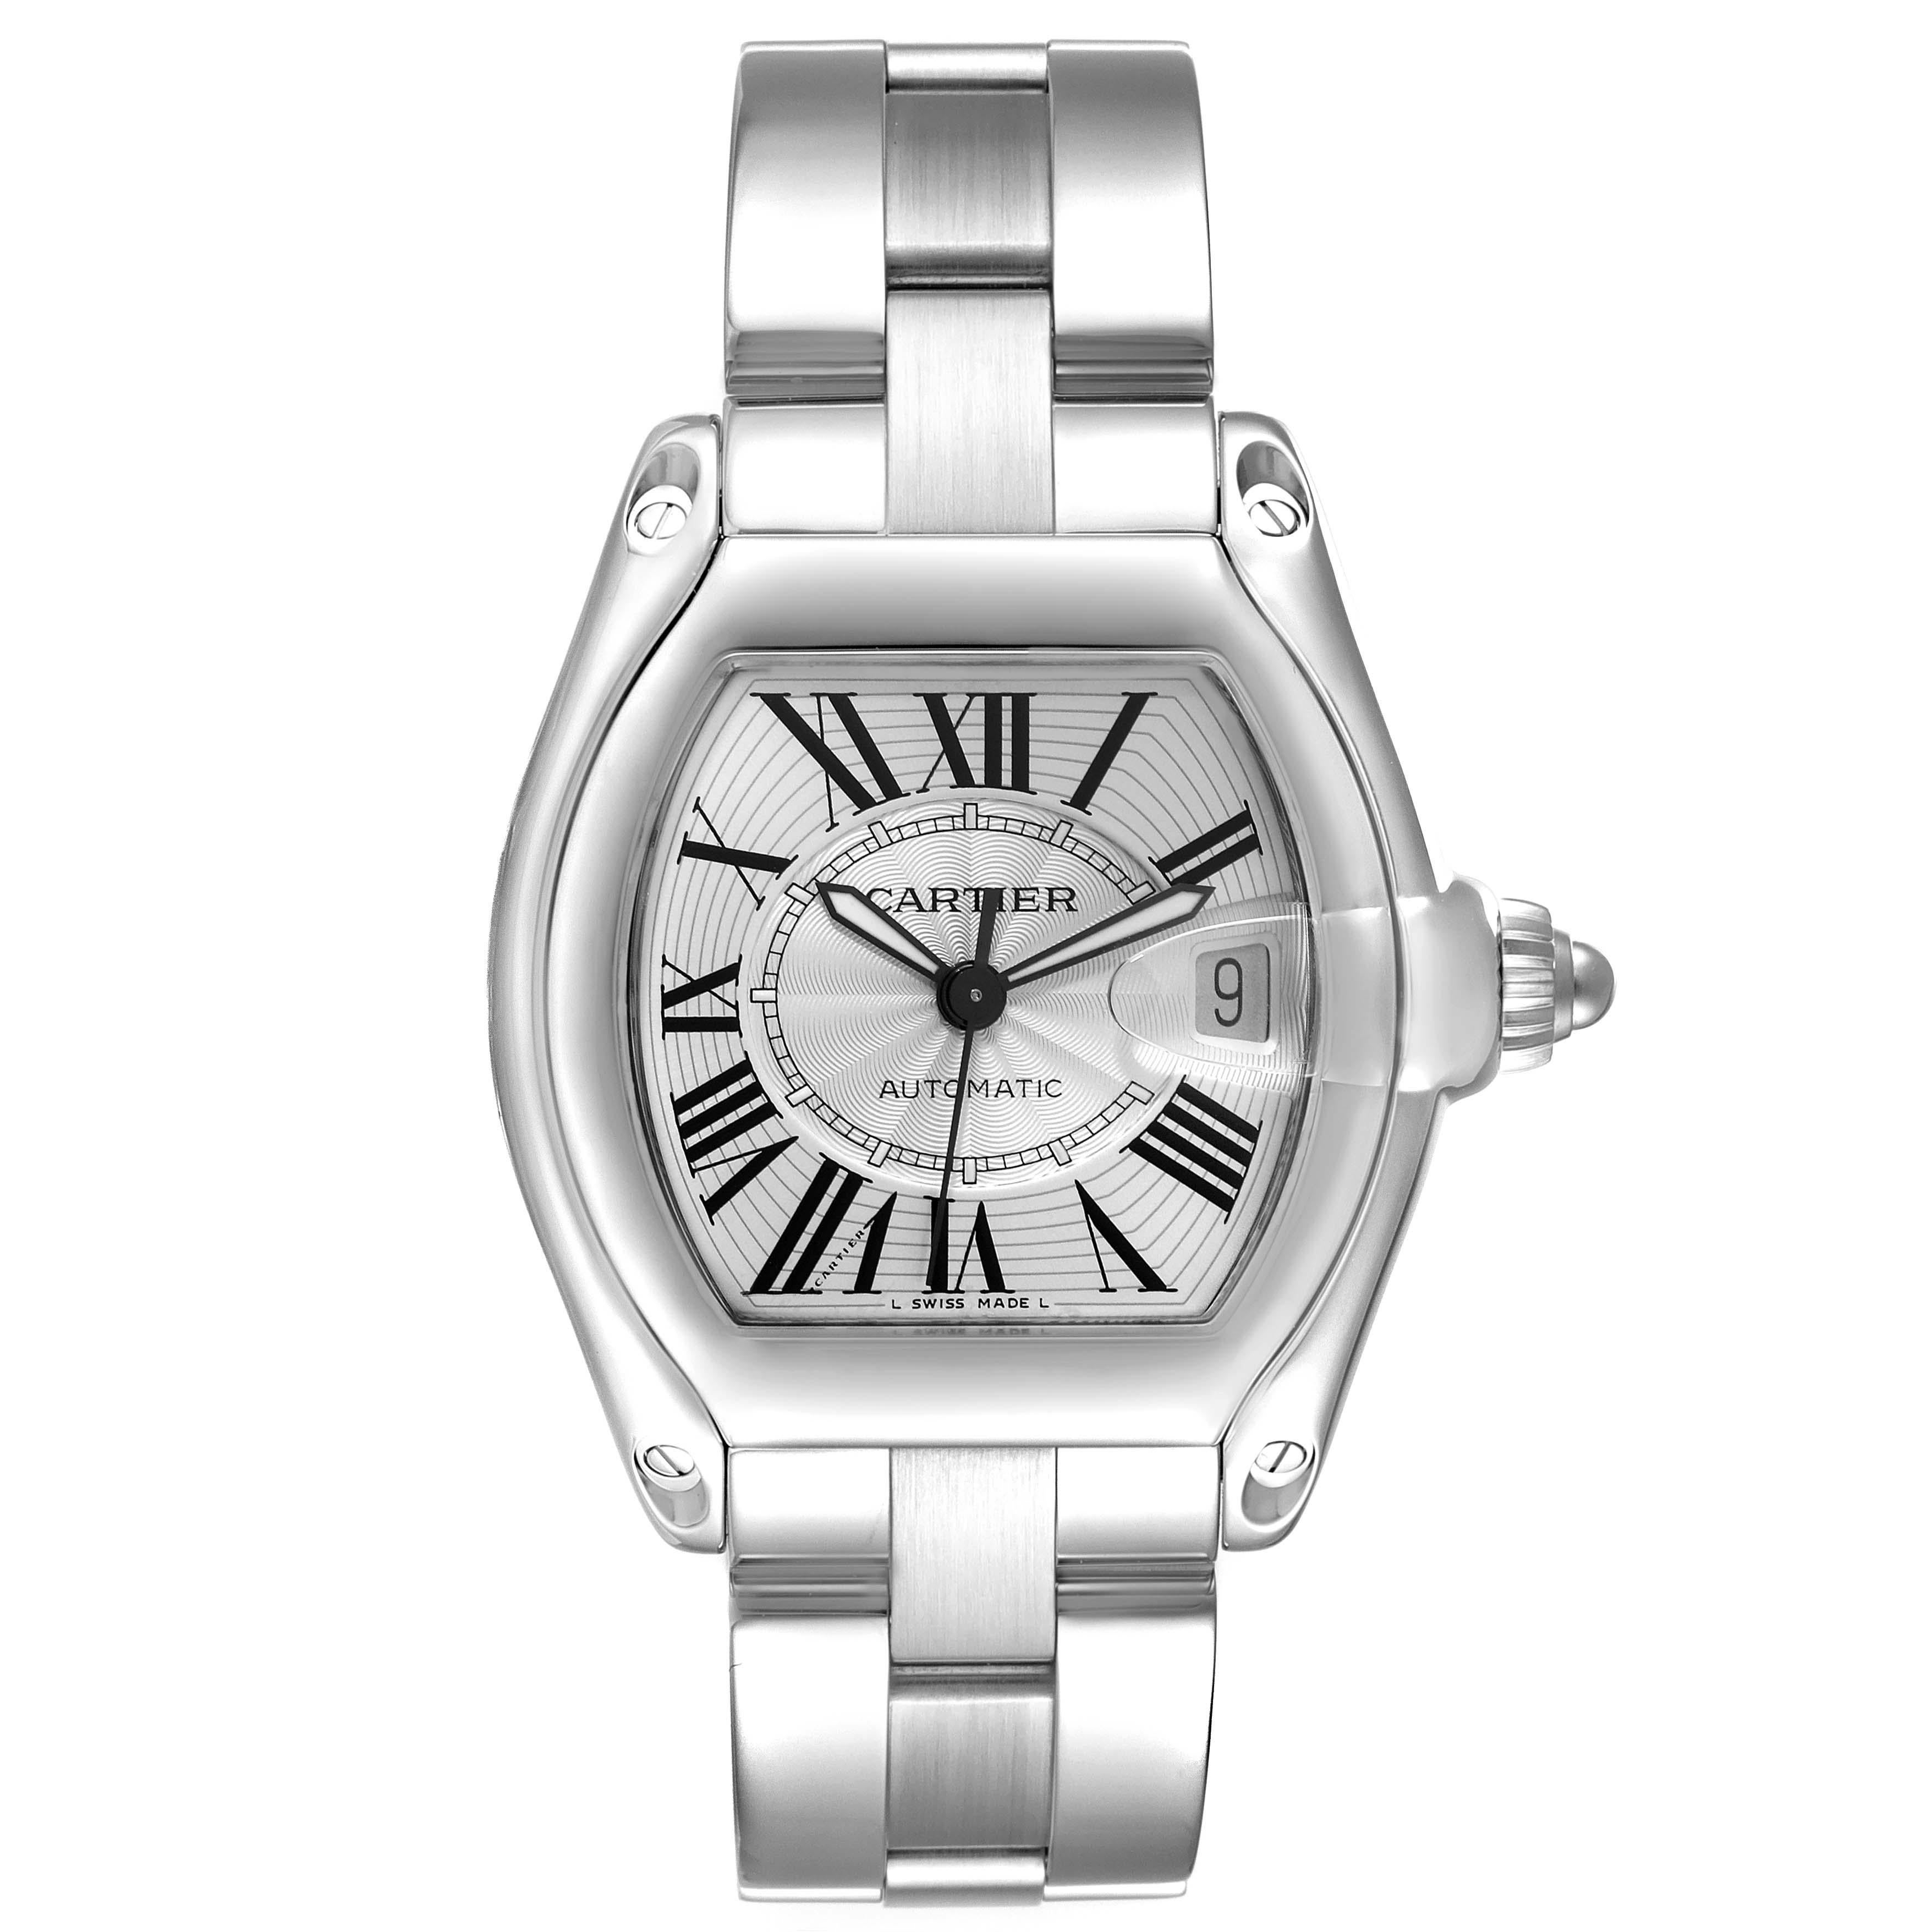 Cartier Roadster Large Silver Dial Steel Mens Watch W62025V3 Box Papers. Automatic self-winding movement. Stainless steel tonneau shaped case 38 x 43 mm. . Scratch resistant sapphire crystal with cyclops magnifying glass. Silver dial with black